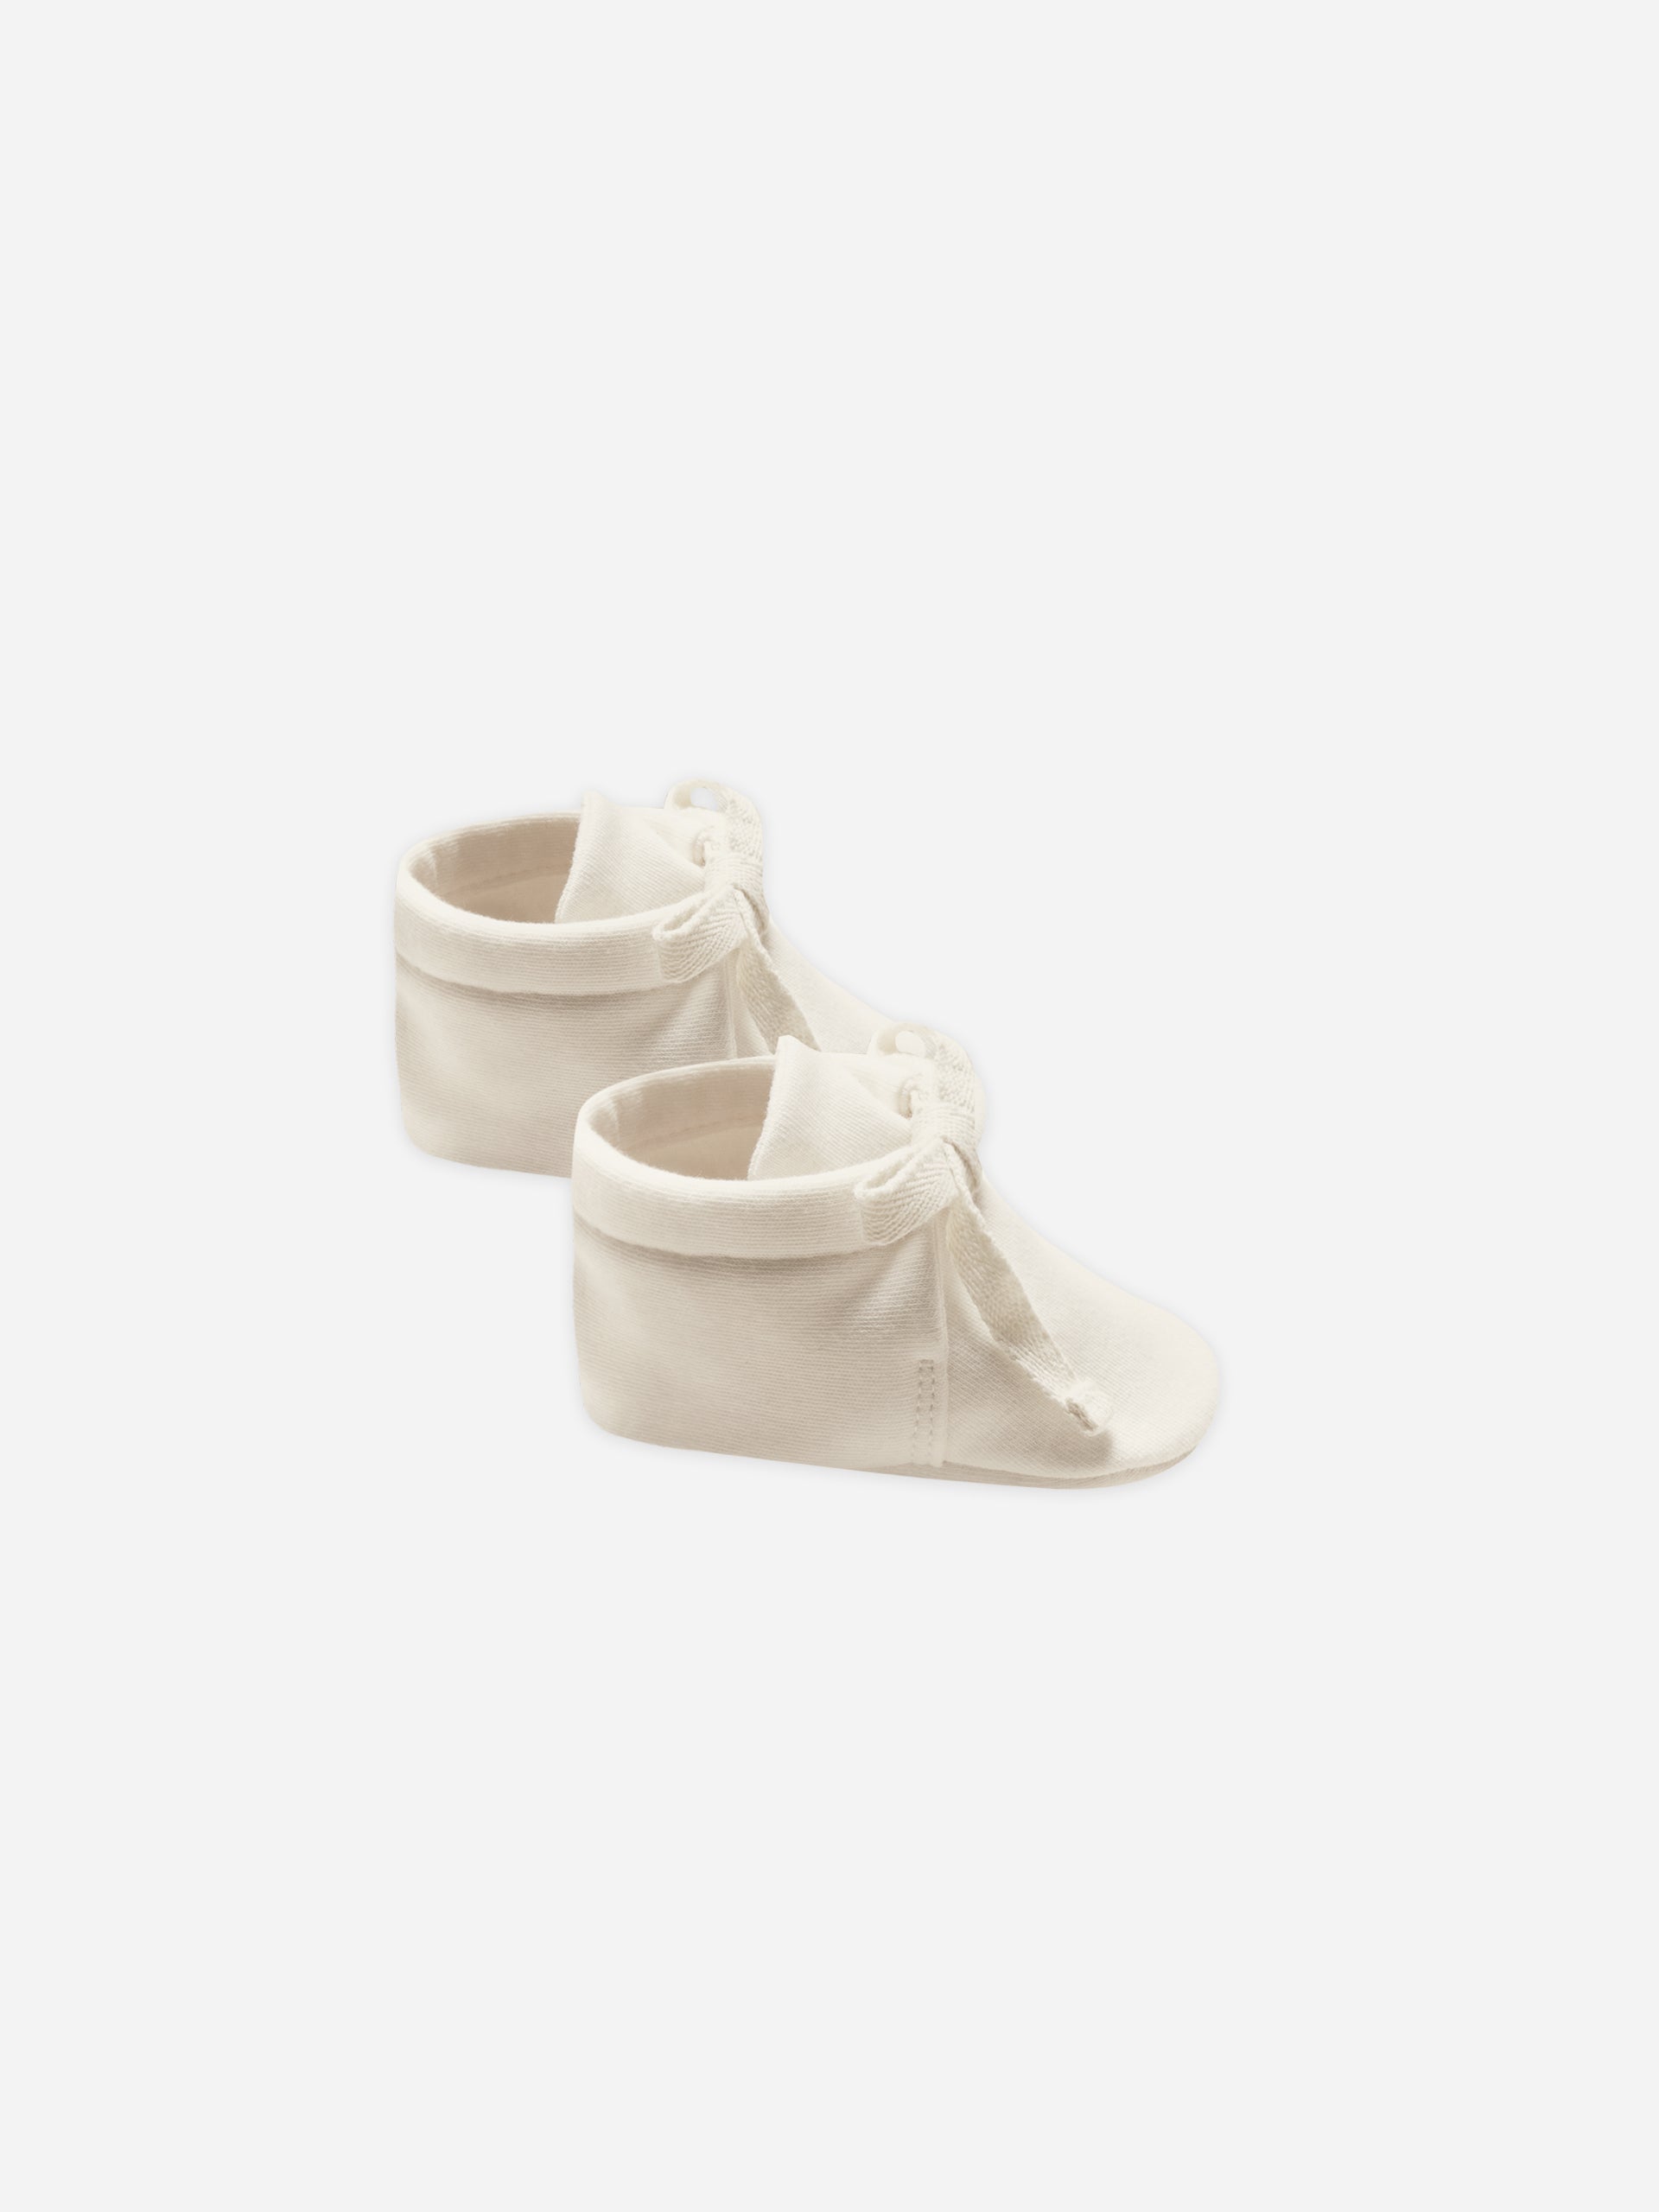 Baby Booties || Natural - Rylee + Cru | Kids Clothes | Trendy Baby Clothes | Modern Infant Outfits |